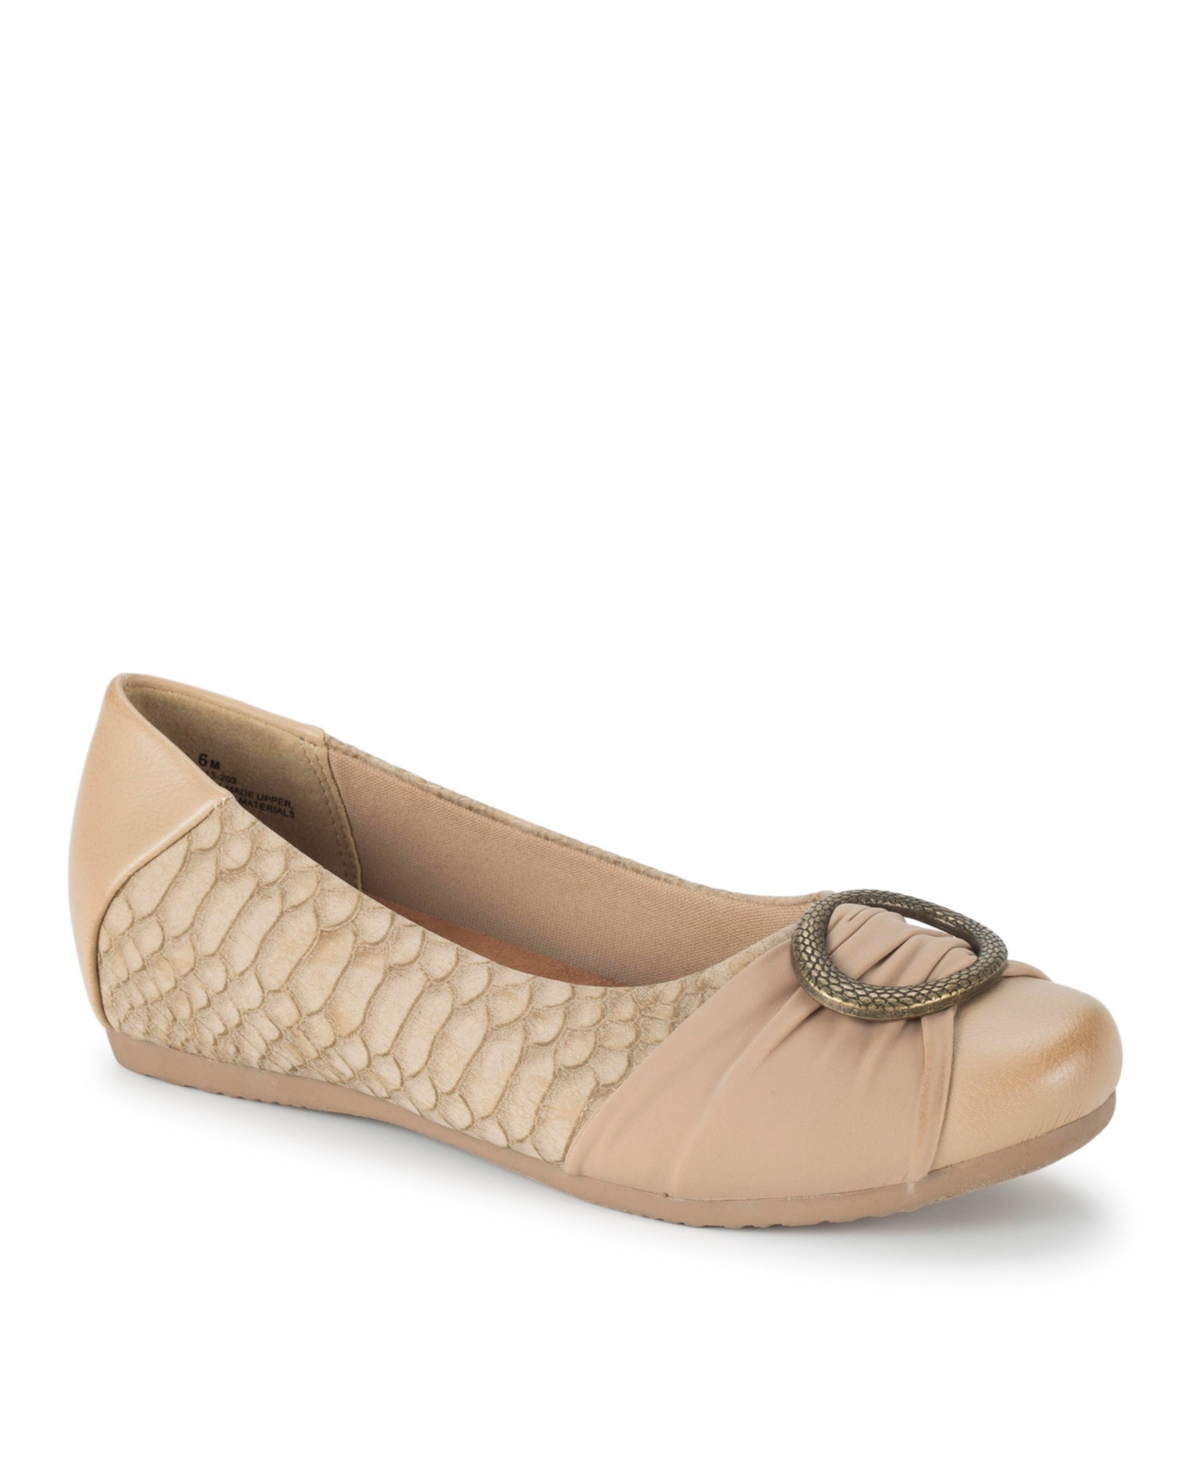 Women's Mabely Flats - Camel